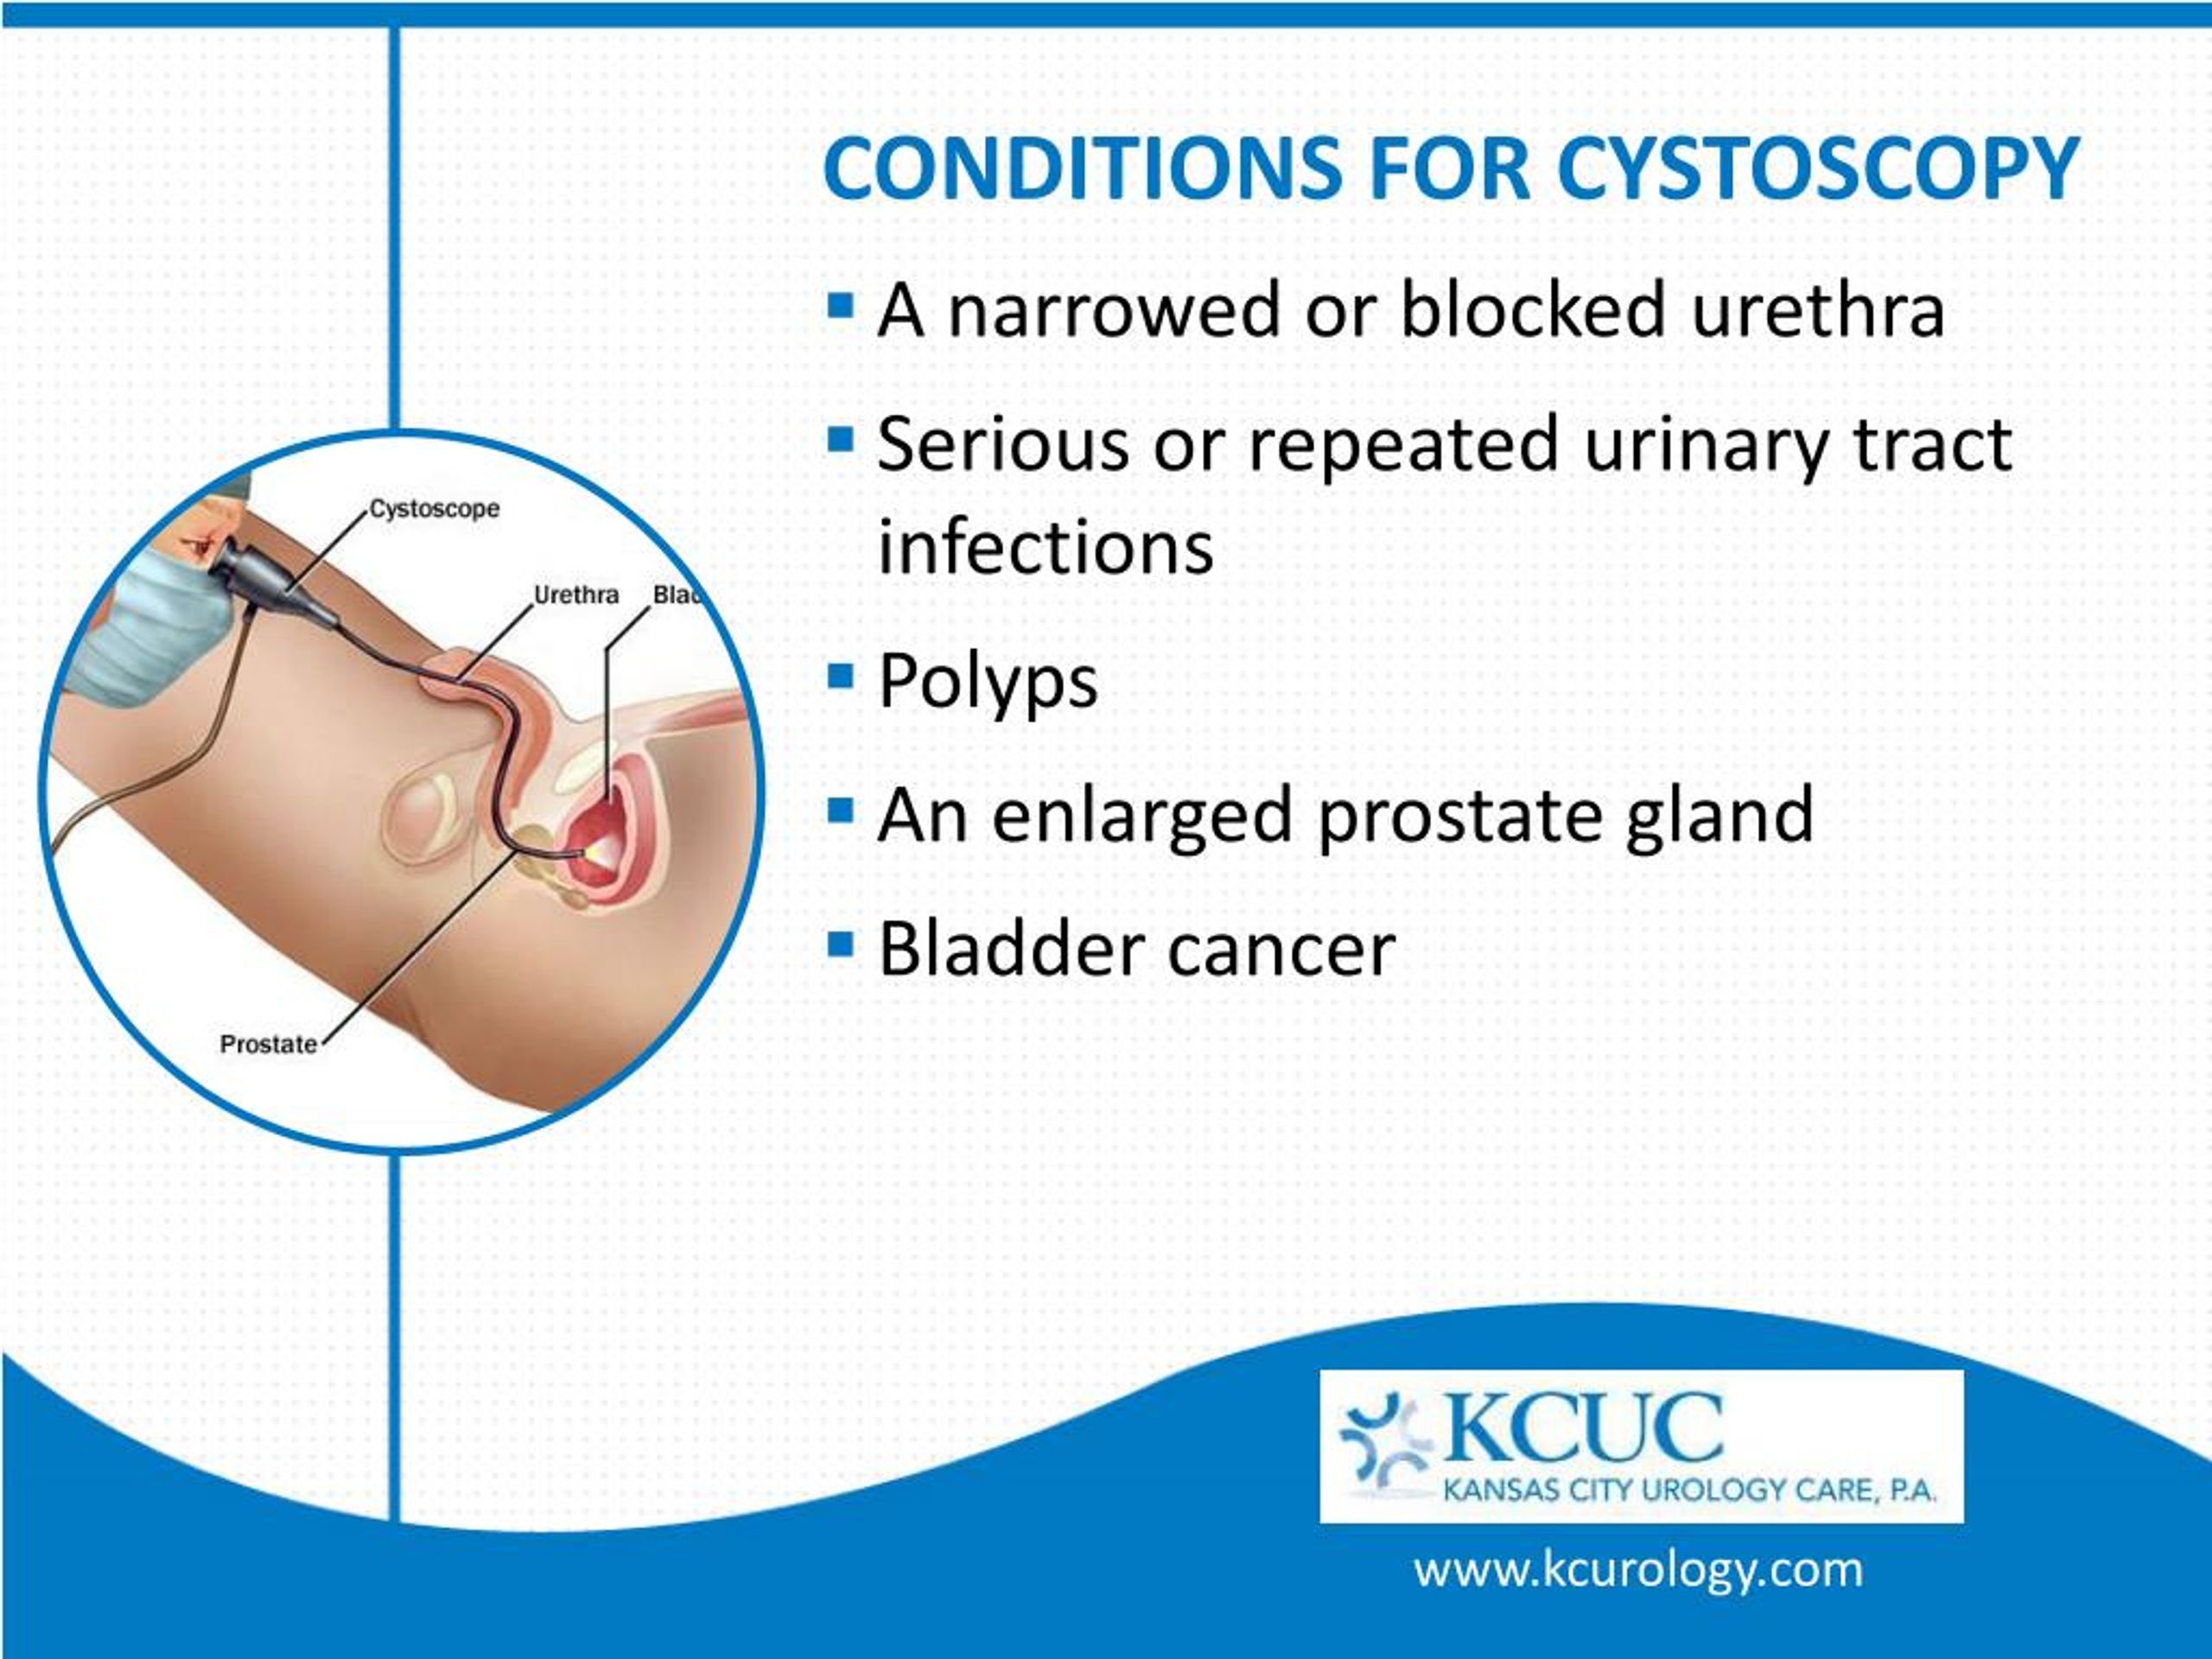 PPT Cystoscopy Detect and Treat Symptoms of Bladder Cancer